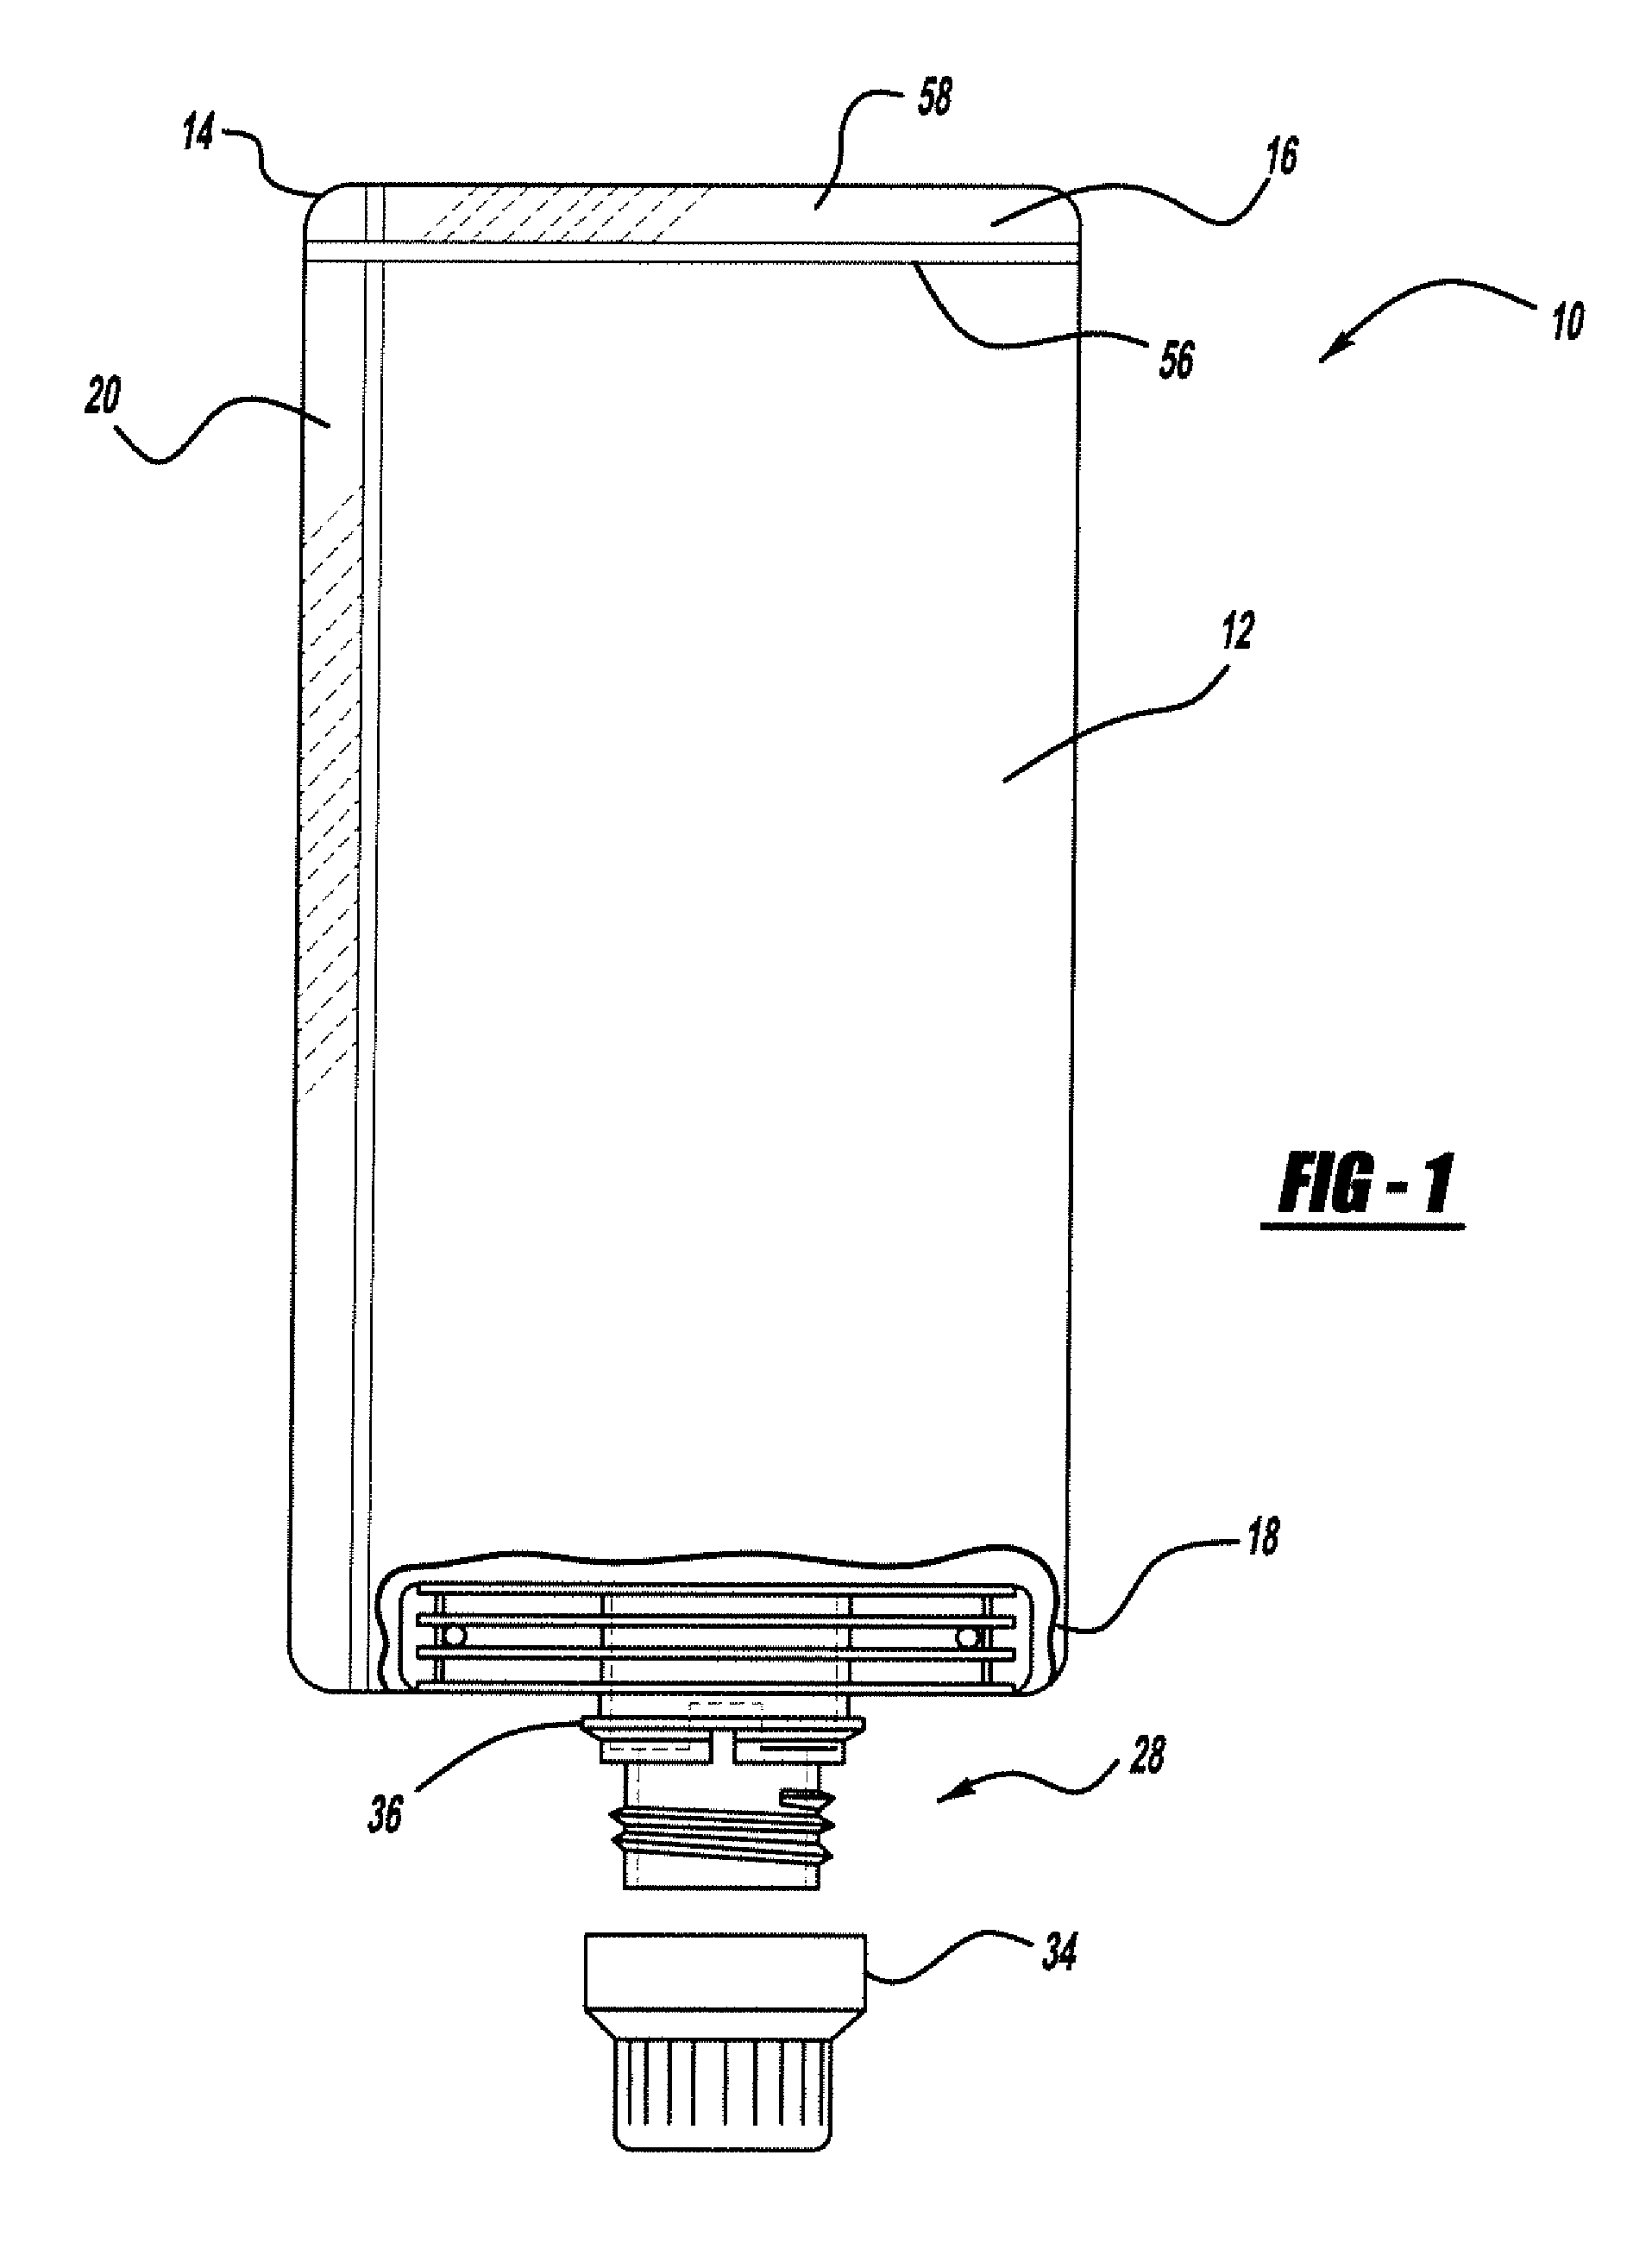 Intermittent and continuous motion high speed pouch form-fill-seal apparatus and method of manufacture